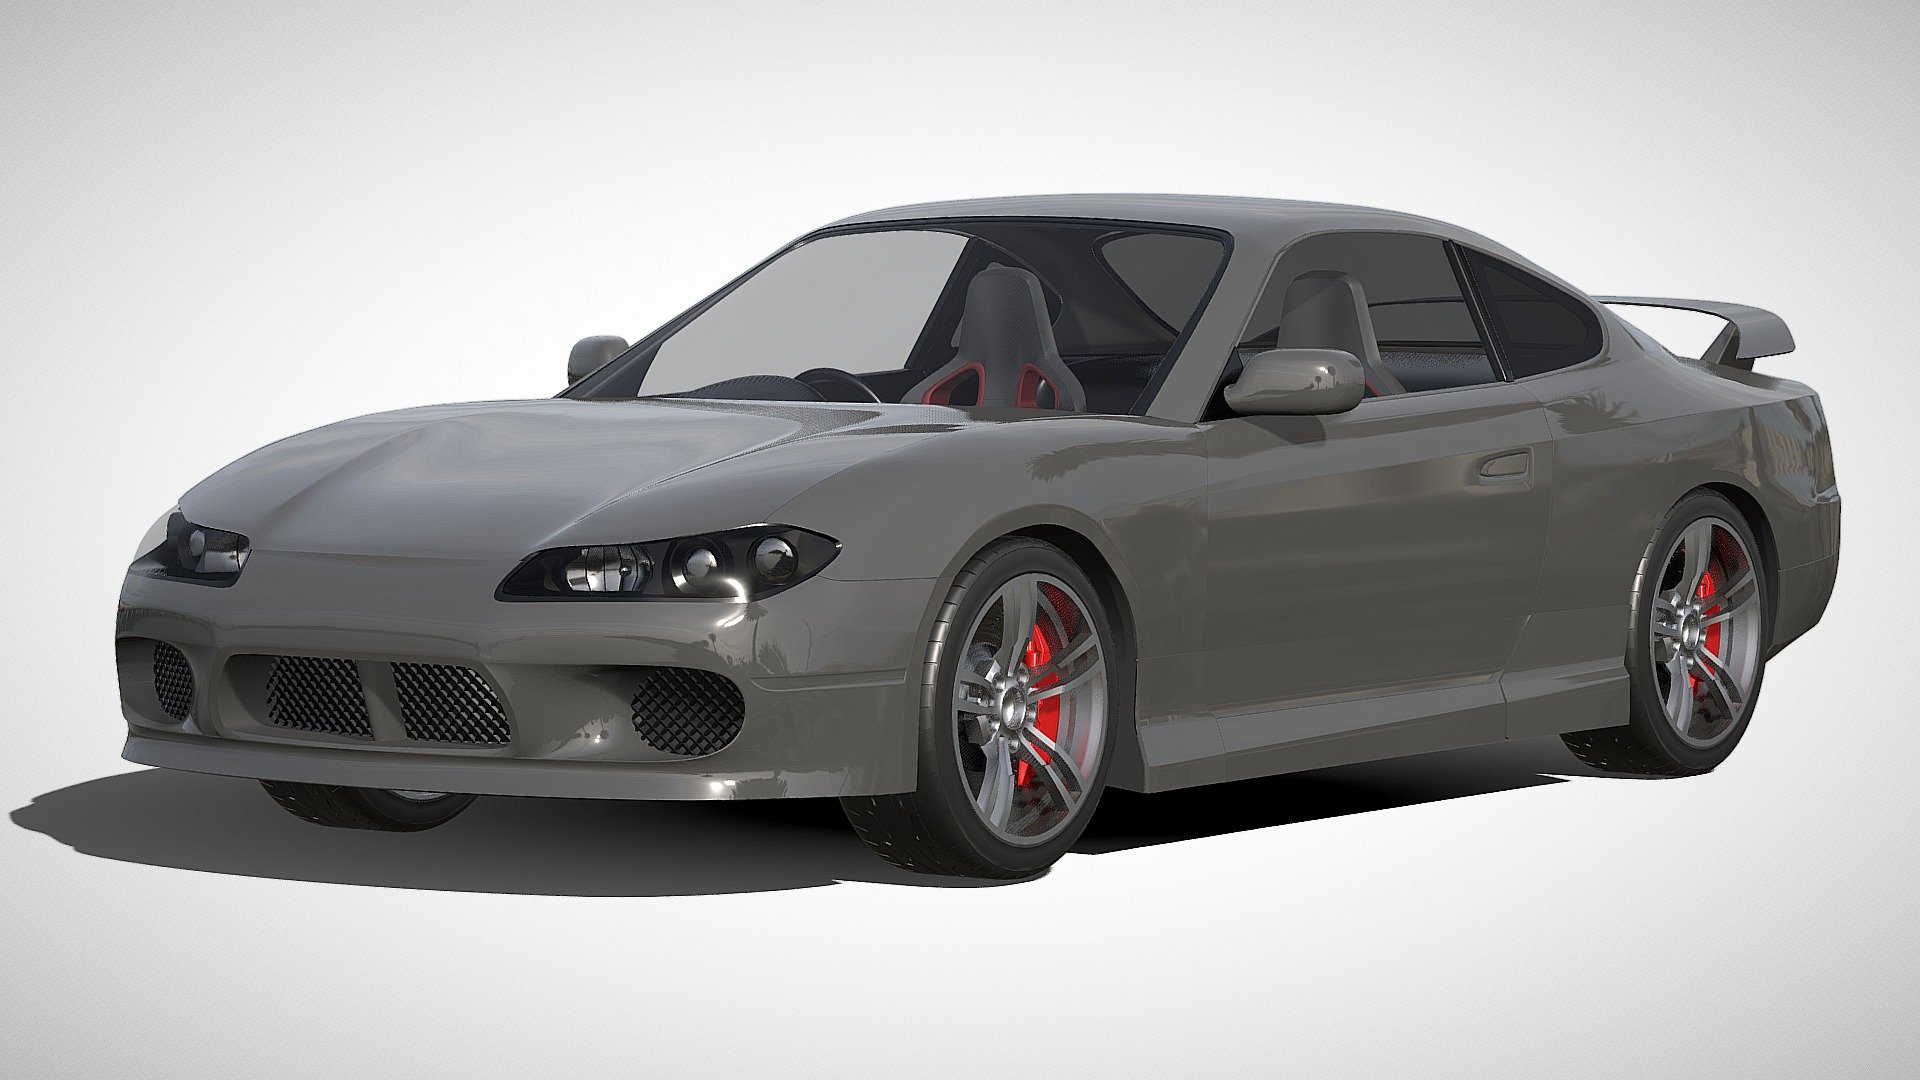 A highly detailed 3D model of the Nissan Silvia S15 created by HDM Studios team

Textures:
- All textures were included in this file, but you can also use the glb file - it is in this type of file that textures are attached to the model.

About 3D model:


Highly detailed car model.
Animated model (Blend.file)
PBR textures (Key Shot)
Highly detailed interior of the car
Suitable for use in games

Thank you for purchasing our models! - Nissan Silvia S15 - Buy Royalty Free 3D model by HDM Studios (@HDM.Studios) 3d model